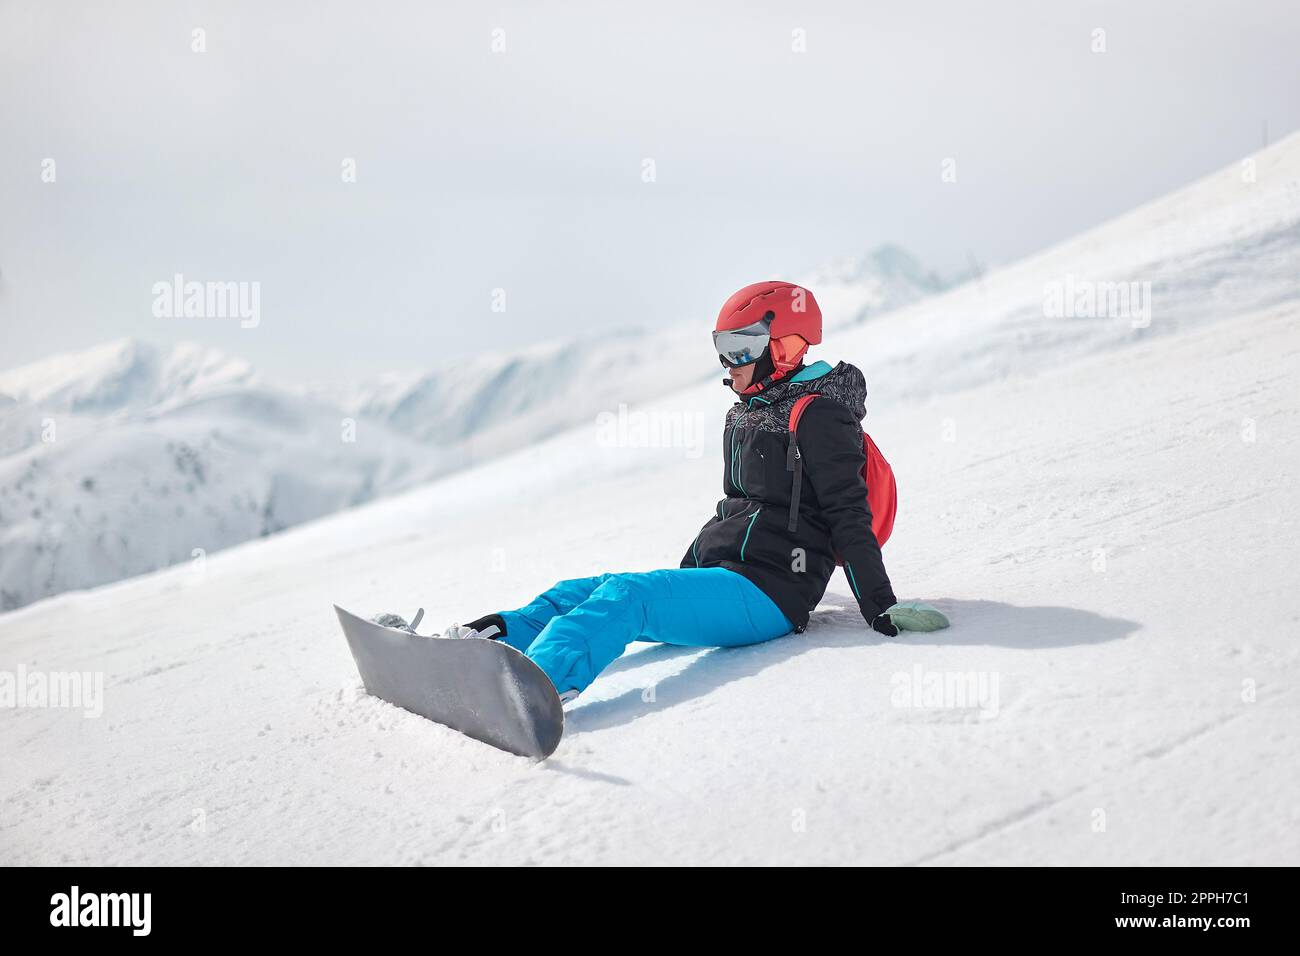 Snowboarder sitting in the white snow Stock Photo